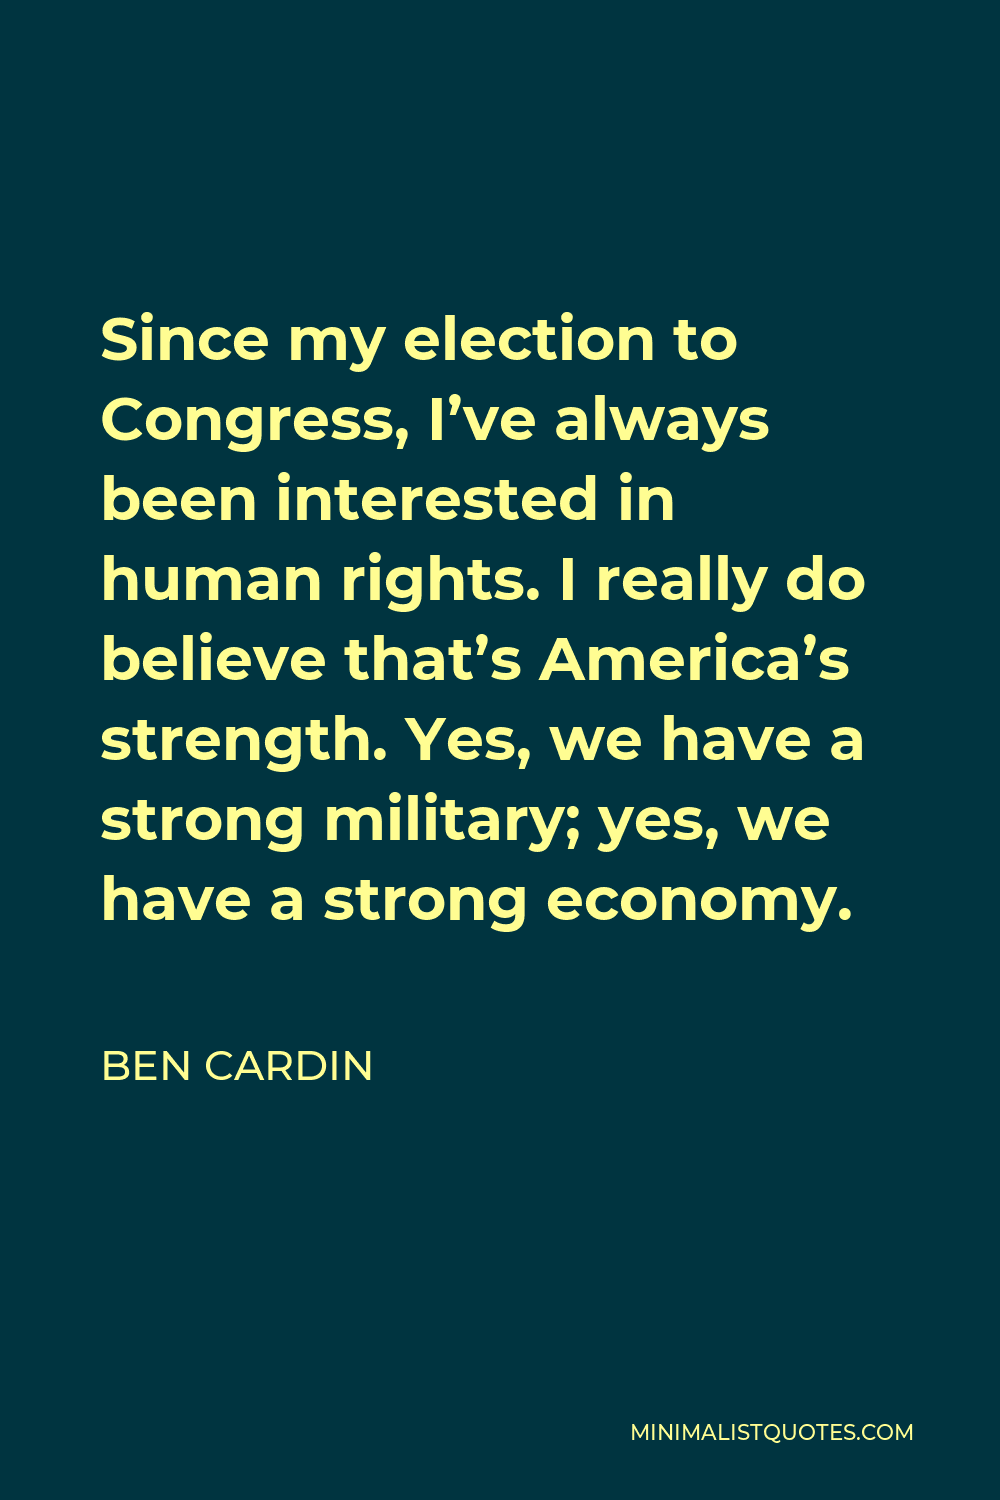 Ben Cardin Quote - Since my election to Congress, I’ve always been interested in human rights. I really do believe that’s America’s strength. Yes, we have a strong military; yes, we have a strong economy.